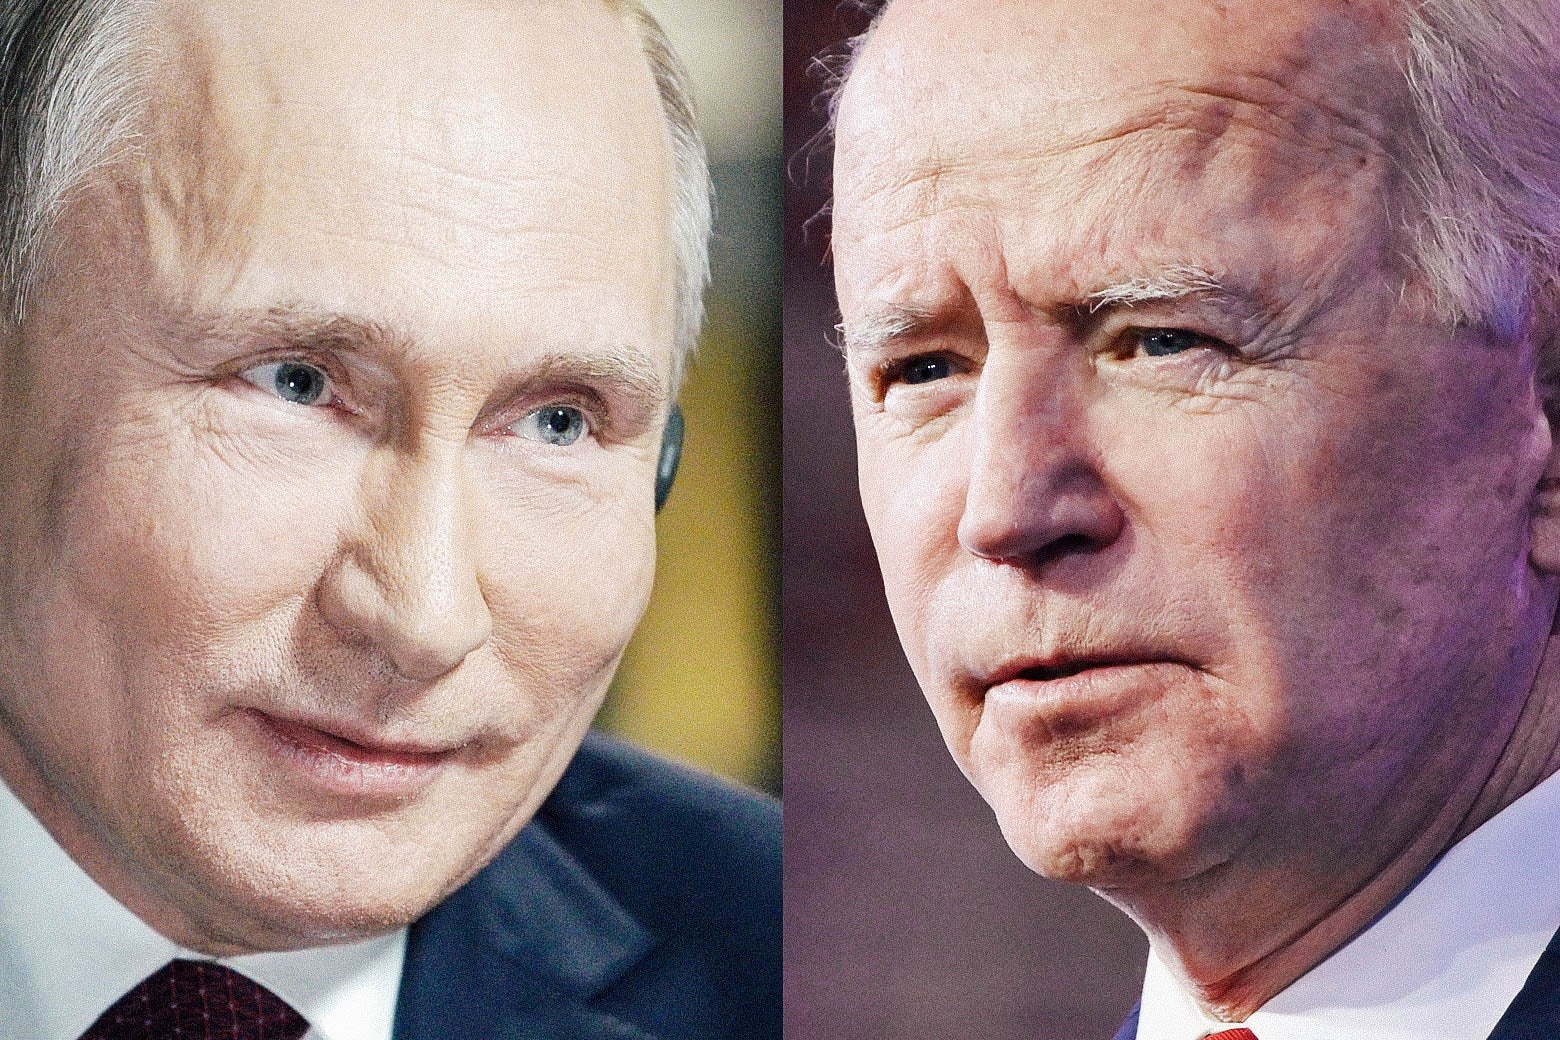 Side by side photos of Putin and Biden